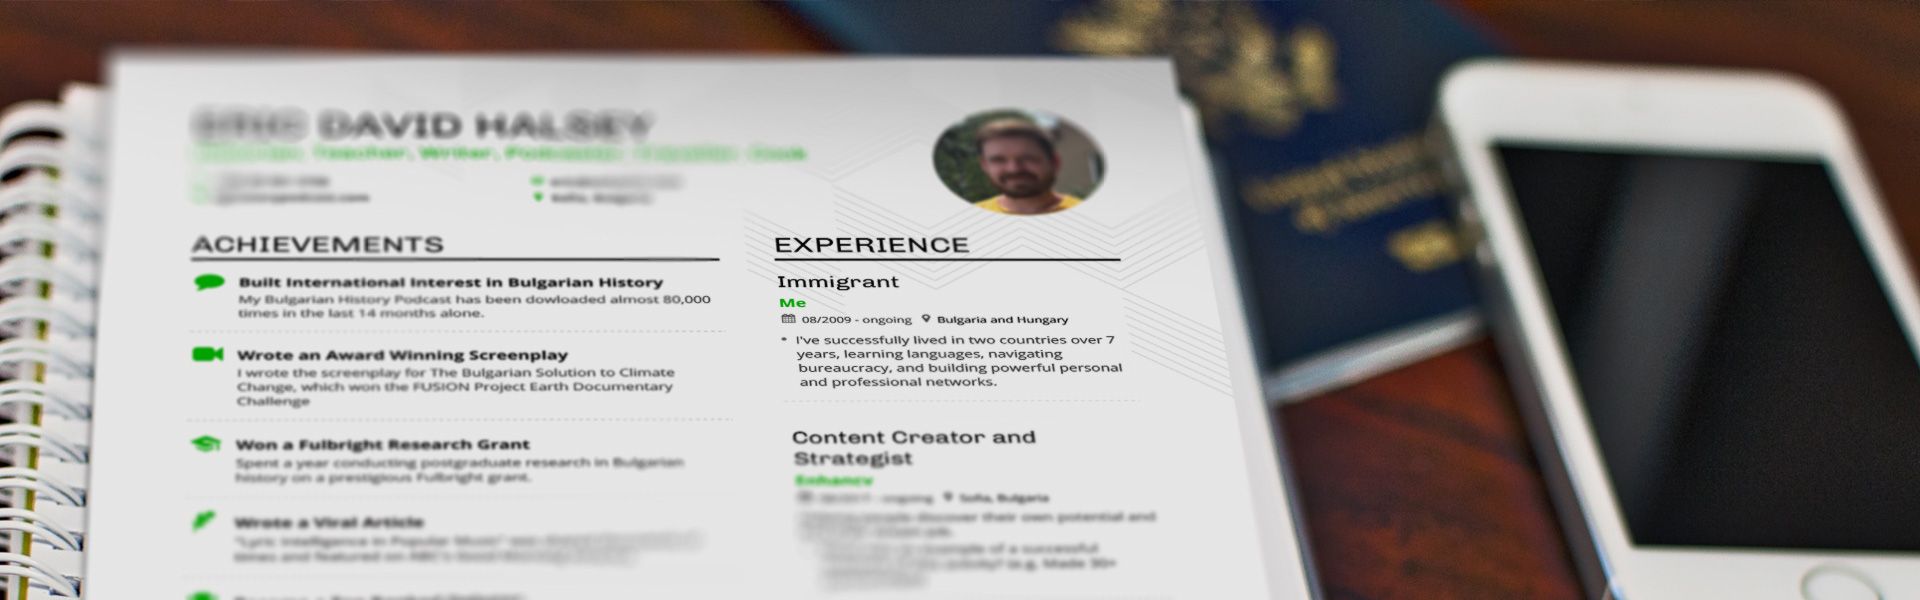 Why I put "Immigrant" on my resume